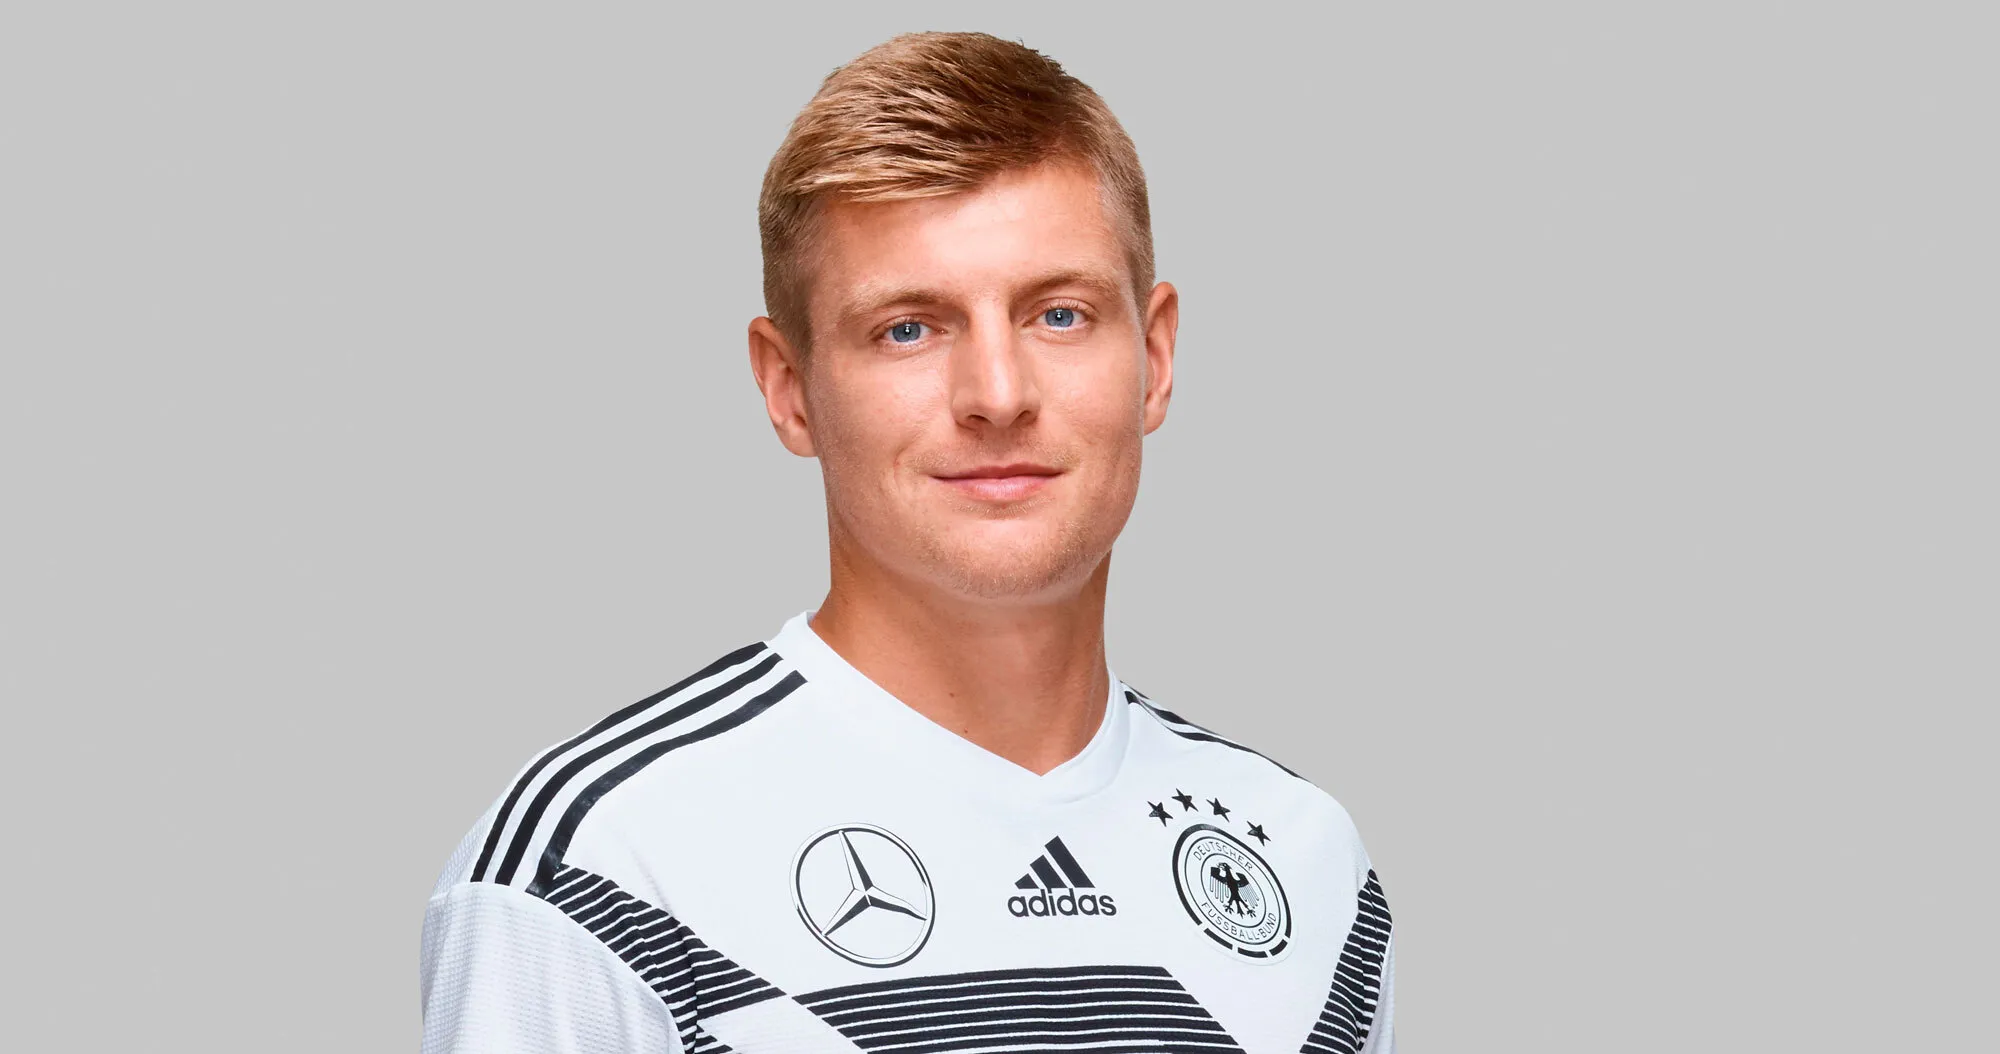 Toni Kroos has now retired from International football